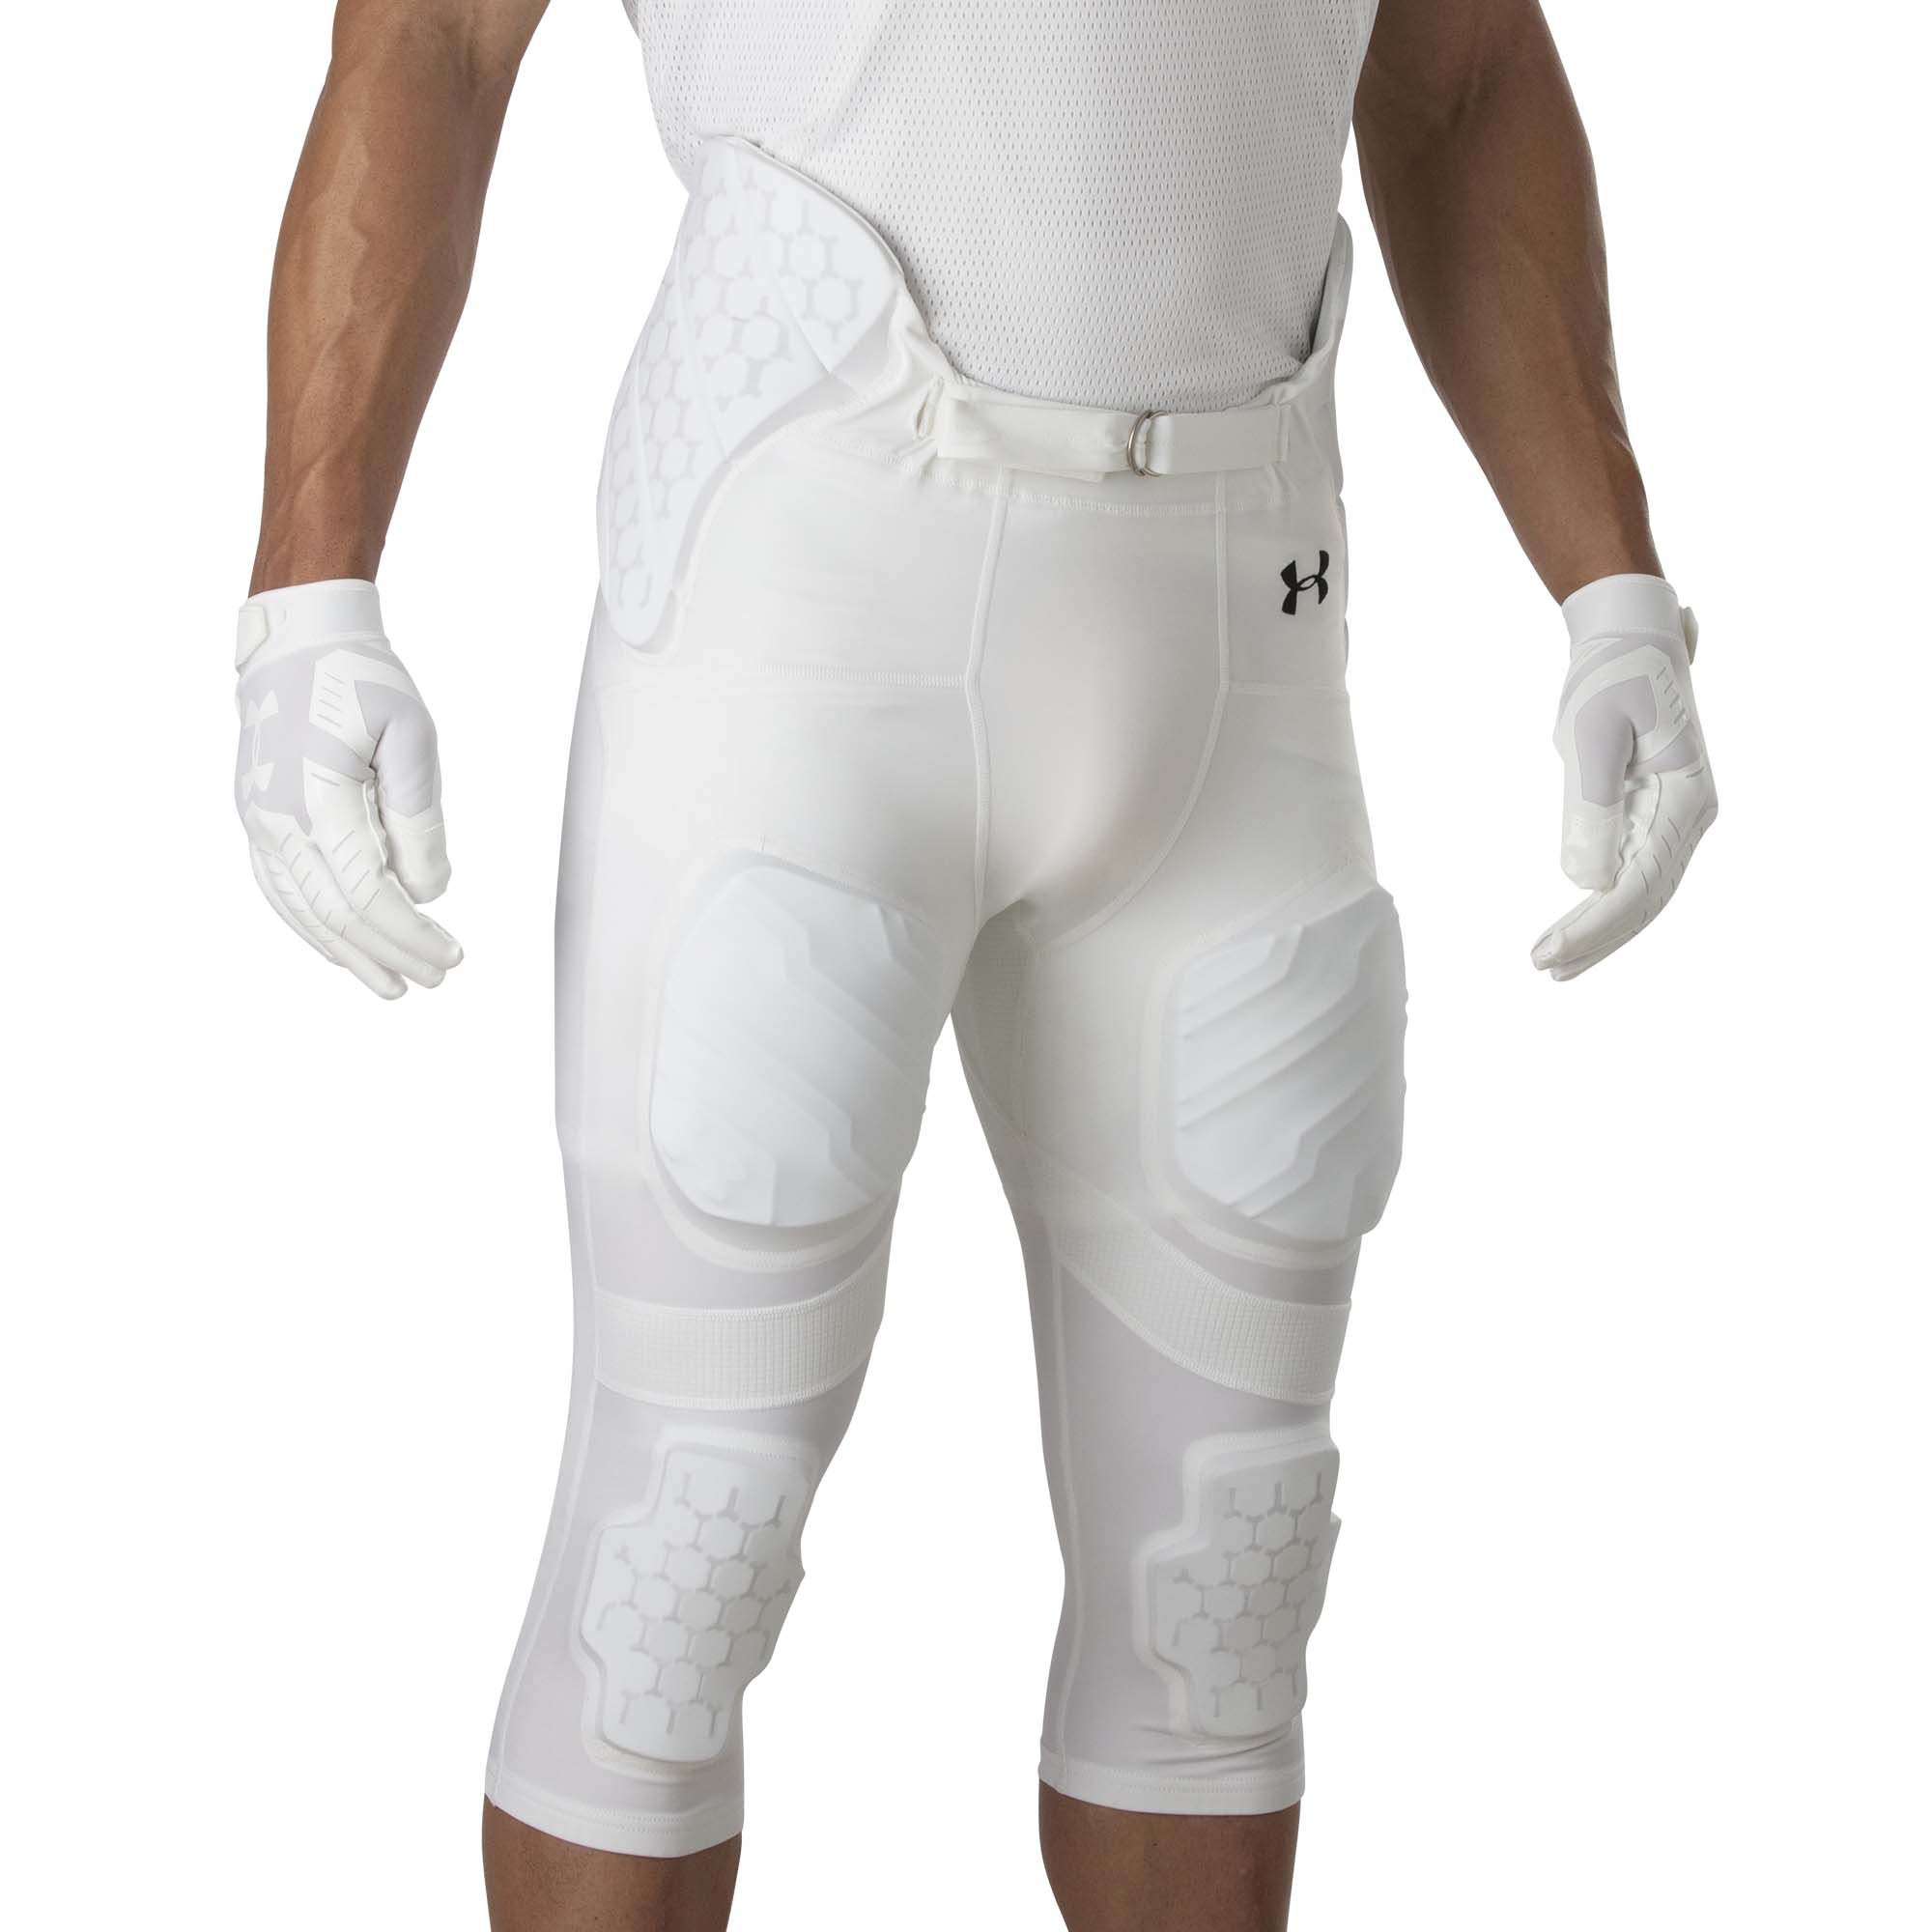 Under Armour Intergrated Football Pants, Padded Football Girdle, Gameday  Football Pants, Youth & Adults sizes